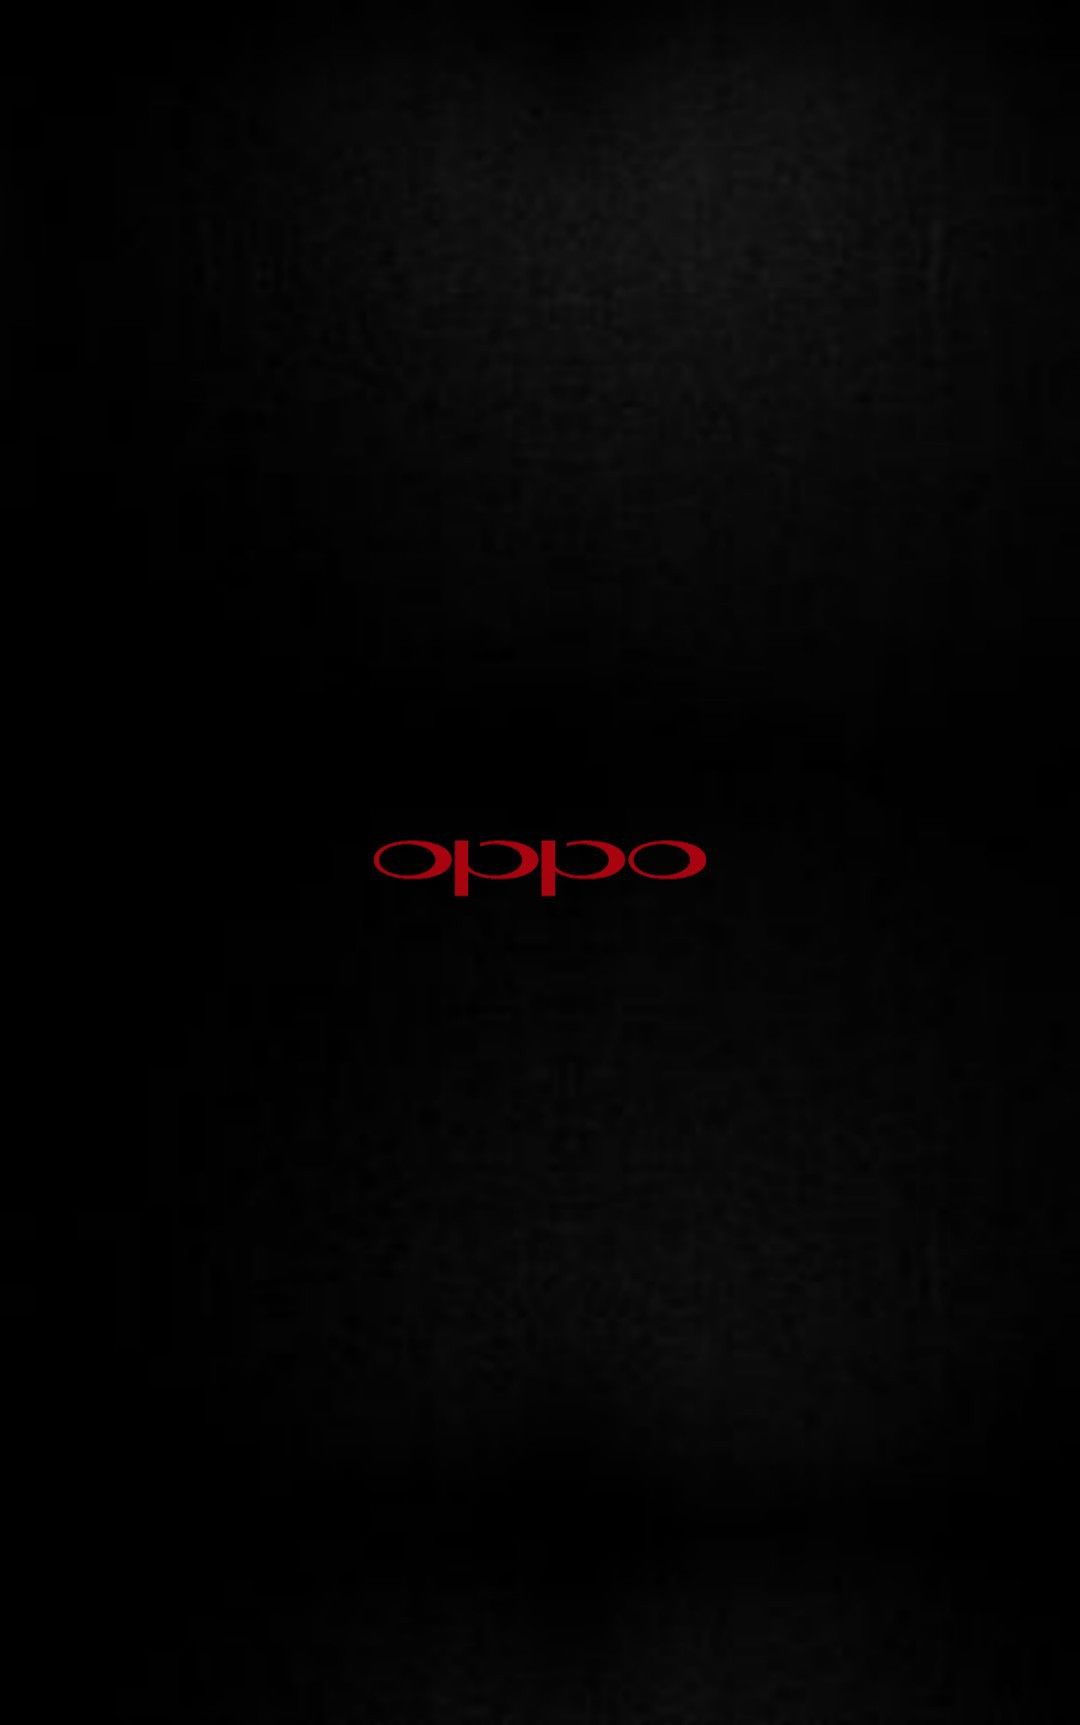  Oppo  Logo Wallpapers  Wallpaper  Cave